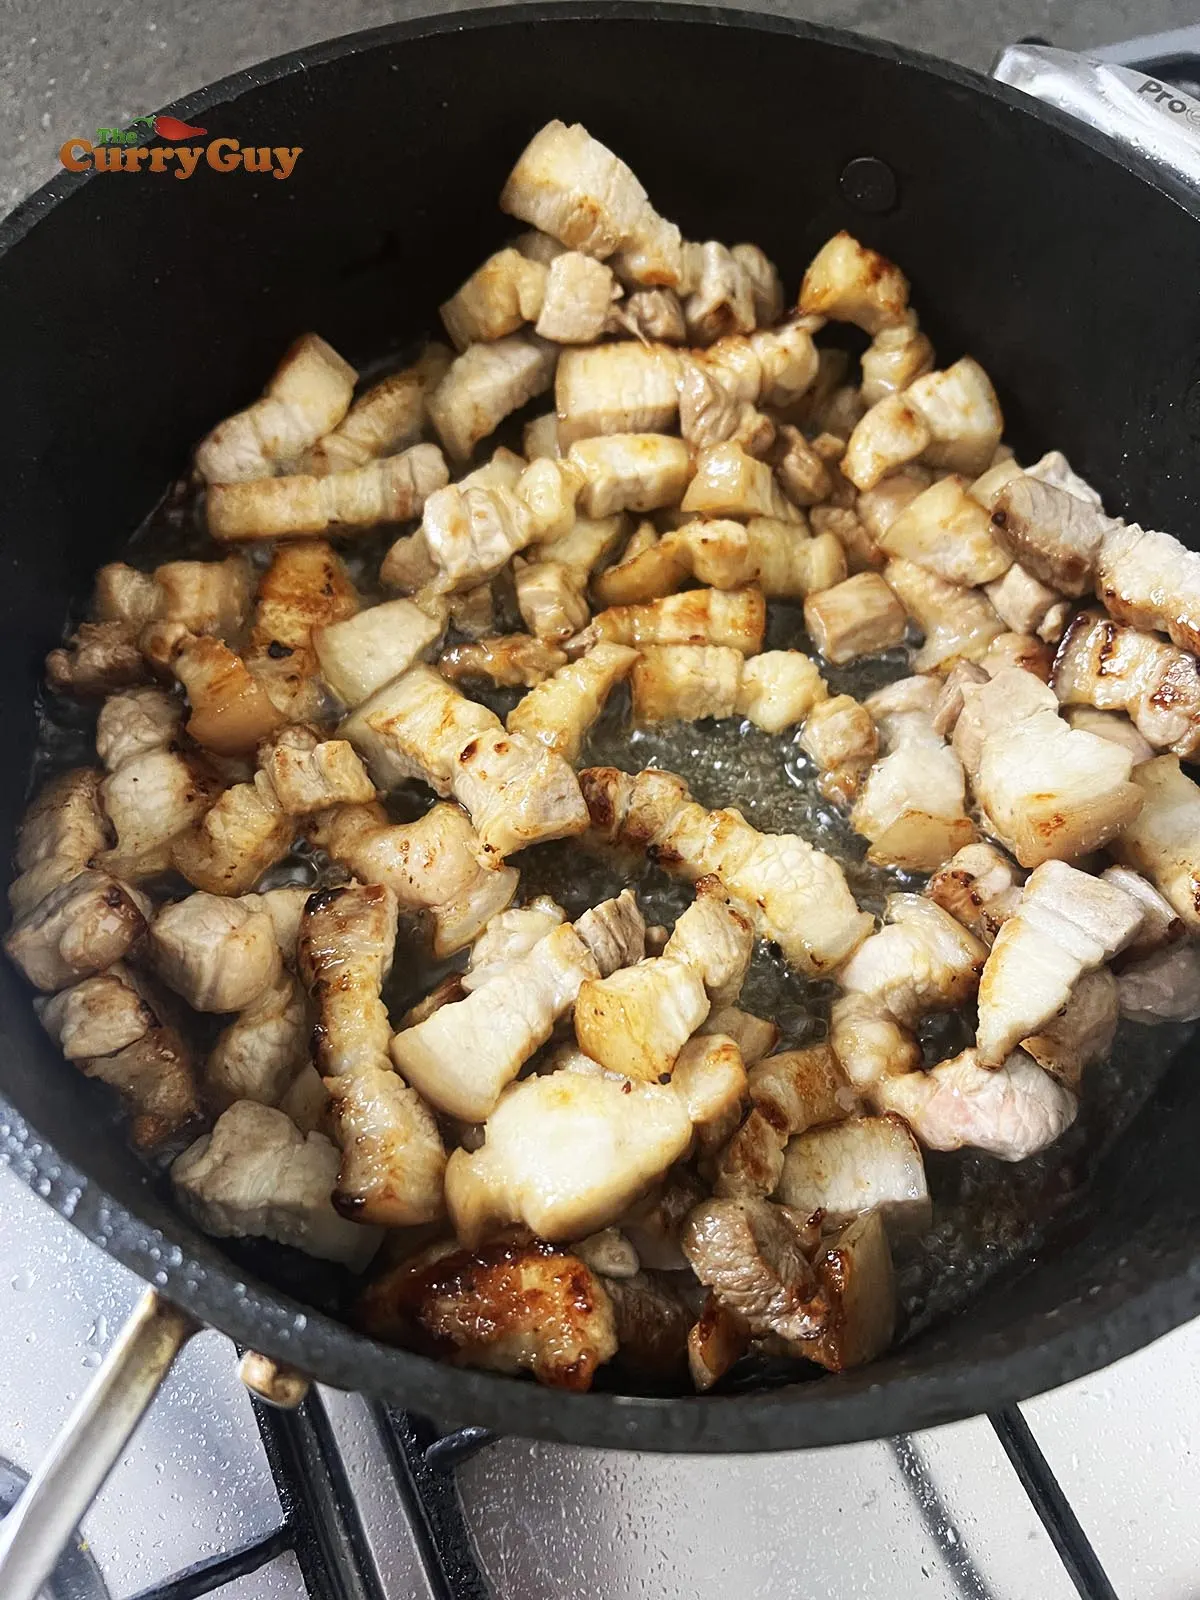 Frying the pork belly